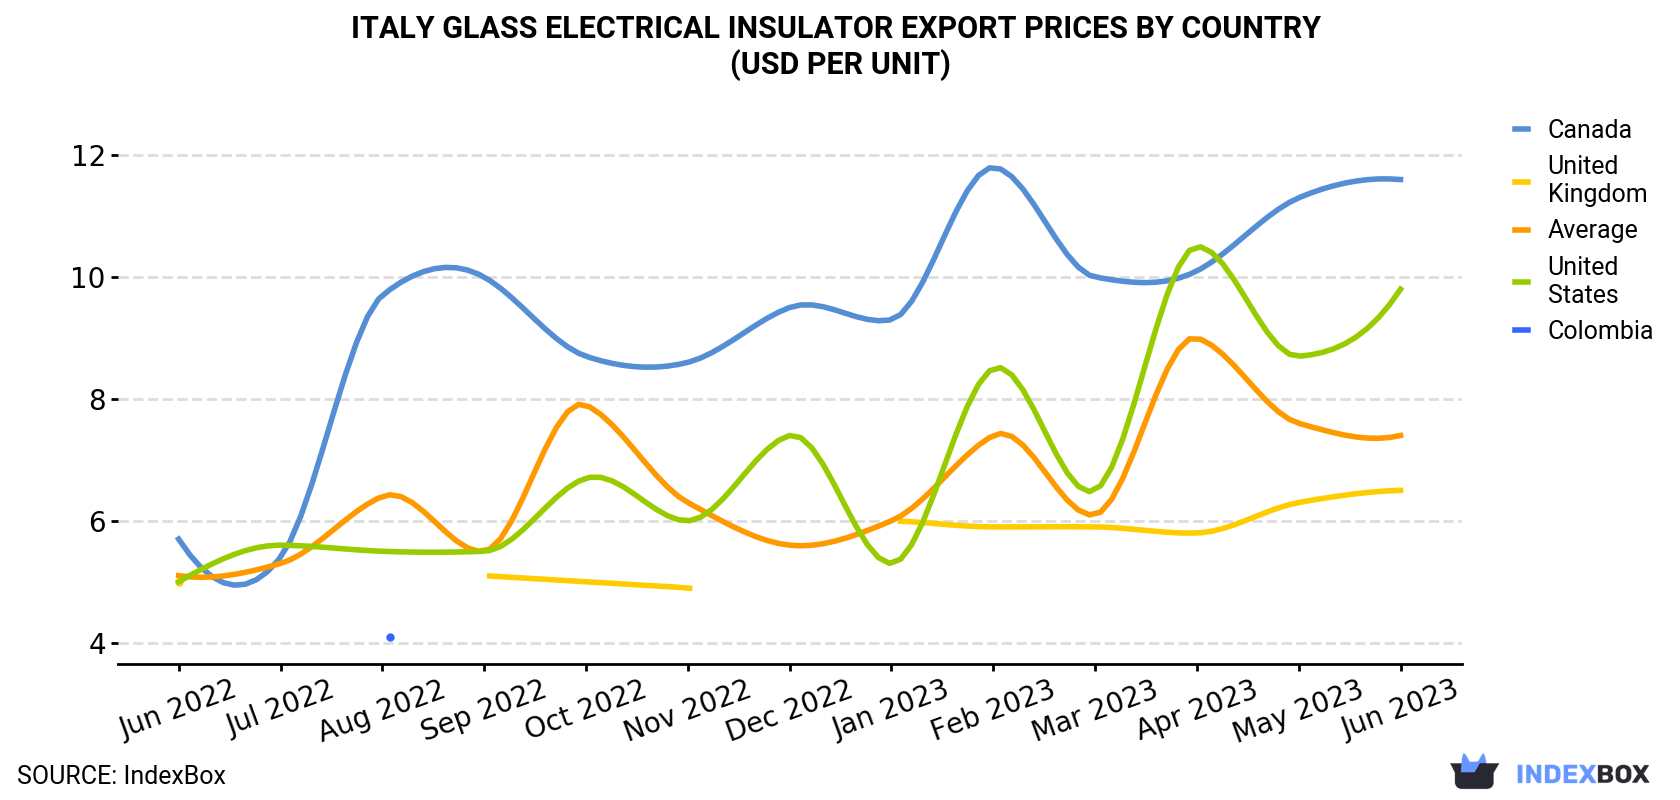 Italy Glass Electrical Insulator Export Prices By Country (USD Per Unit)